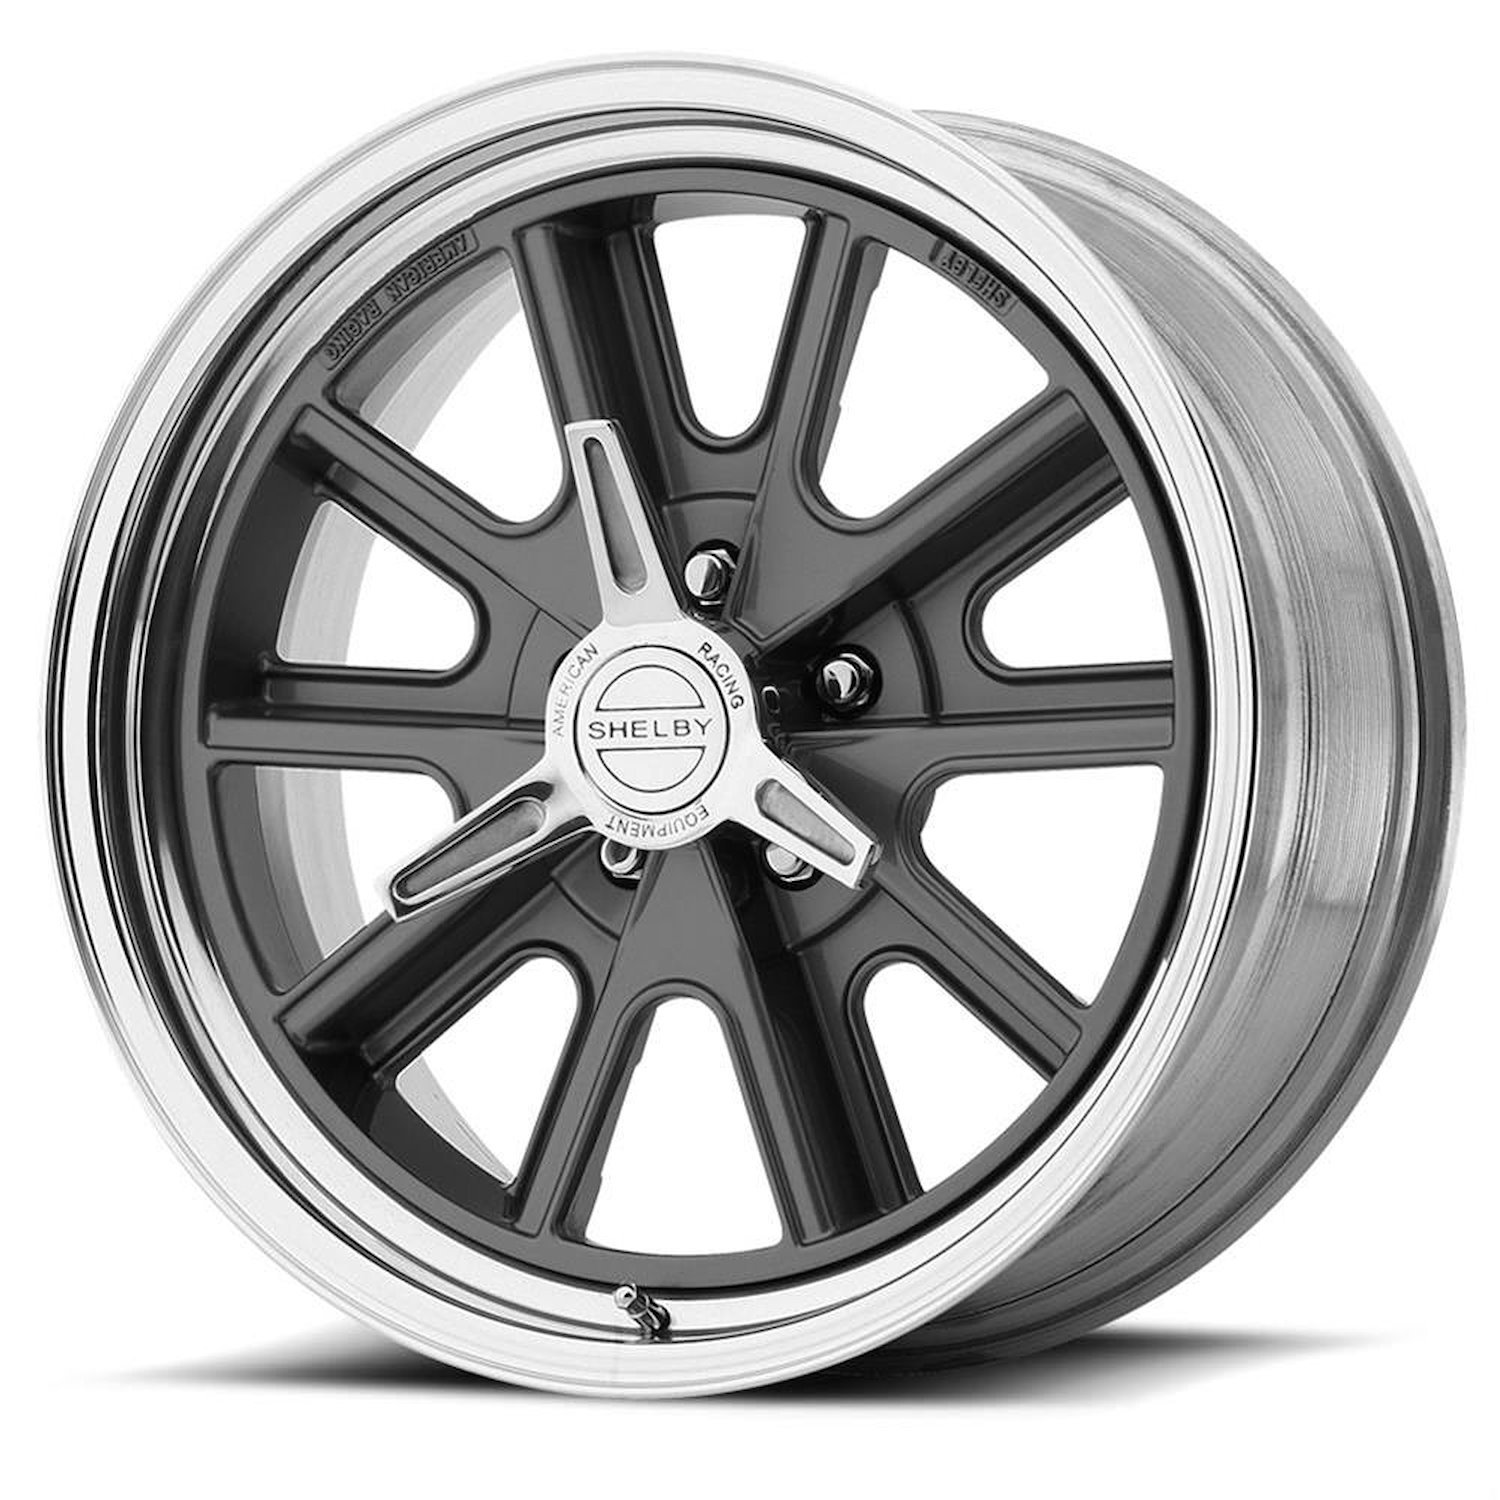 AMERICAN RACING 427 SHELBY COBRA TWO-PIECE MAG GRAY CENTER POLISHED BARREL 18 x 9.5 5x4.5 12 5.72